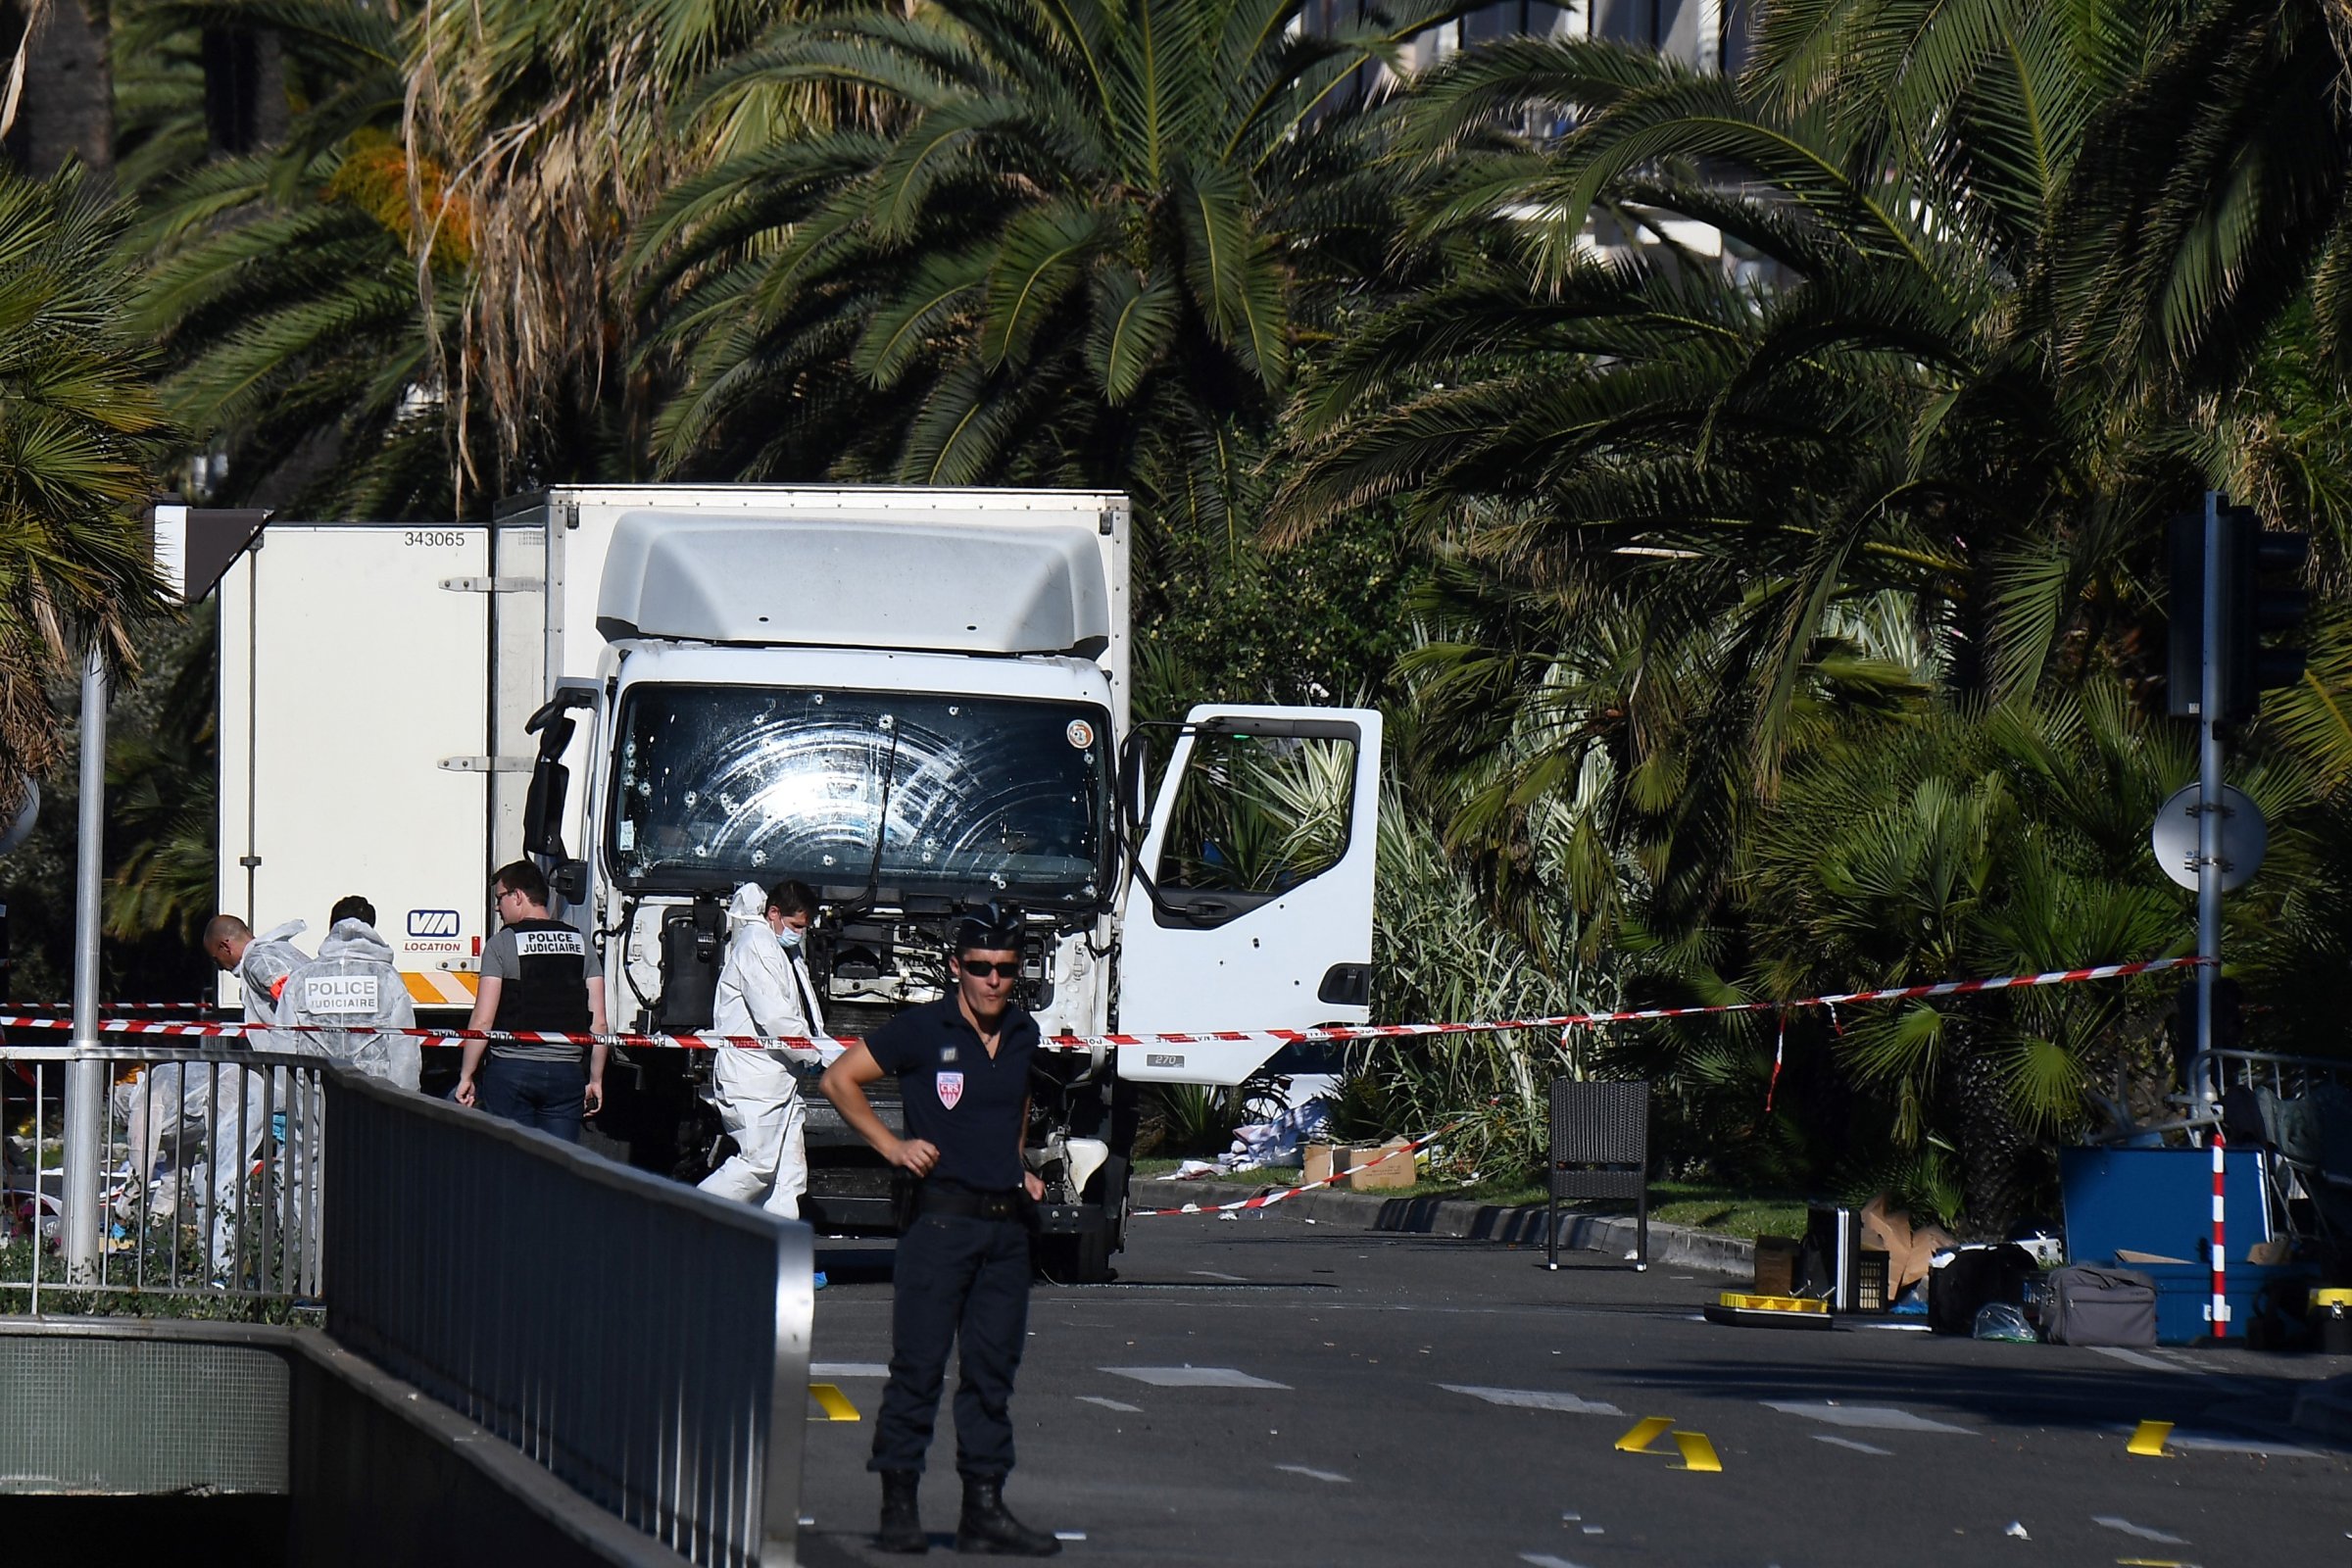 The truck driven by Mohamed Lahouaiej Bouhlel through a crowd watching a fireworks display in Nice, France, on July 14, 2016. Eighty-four people were killed.